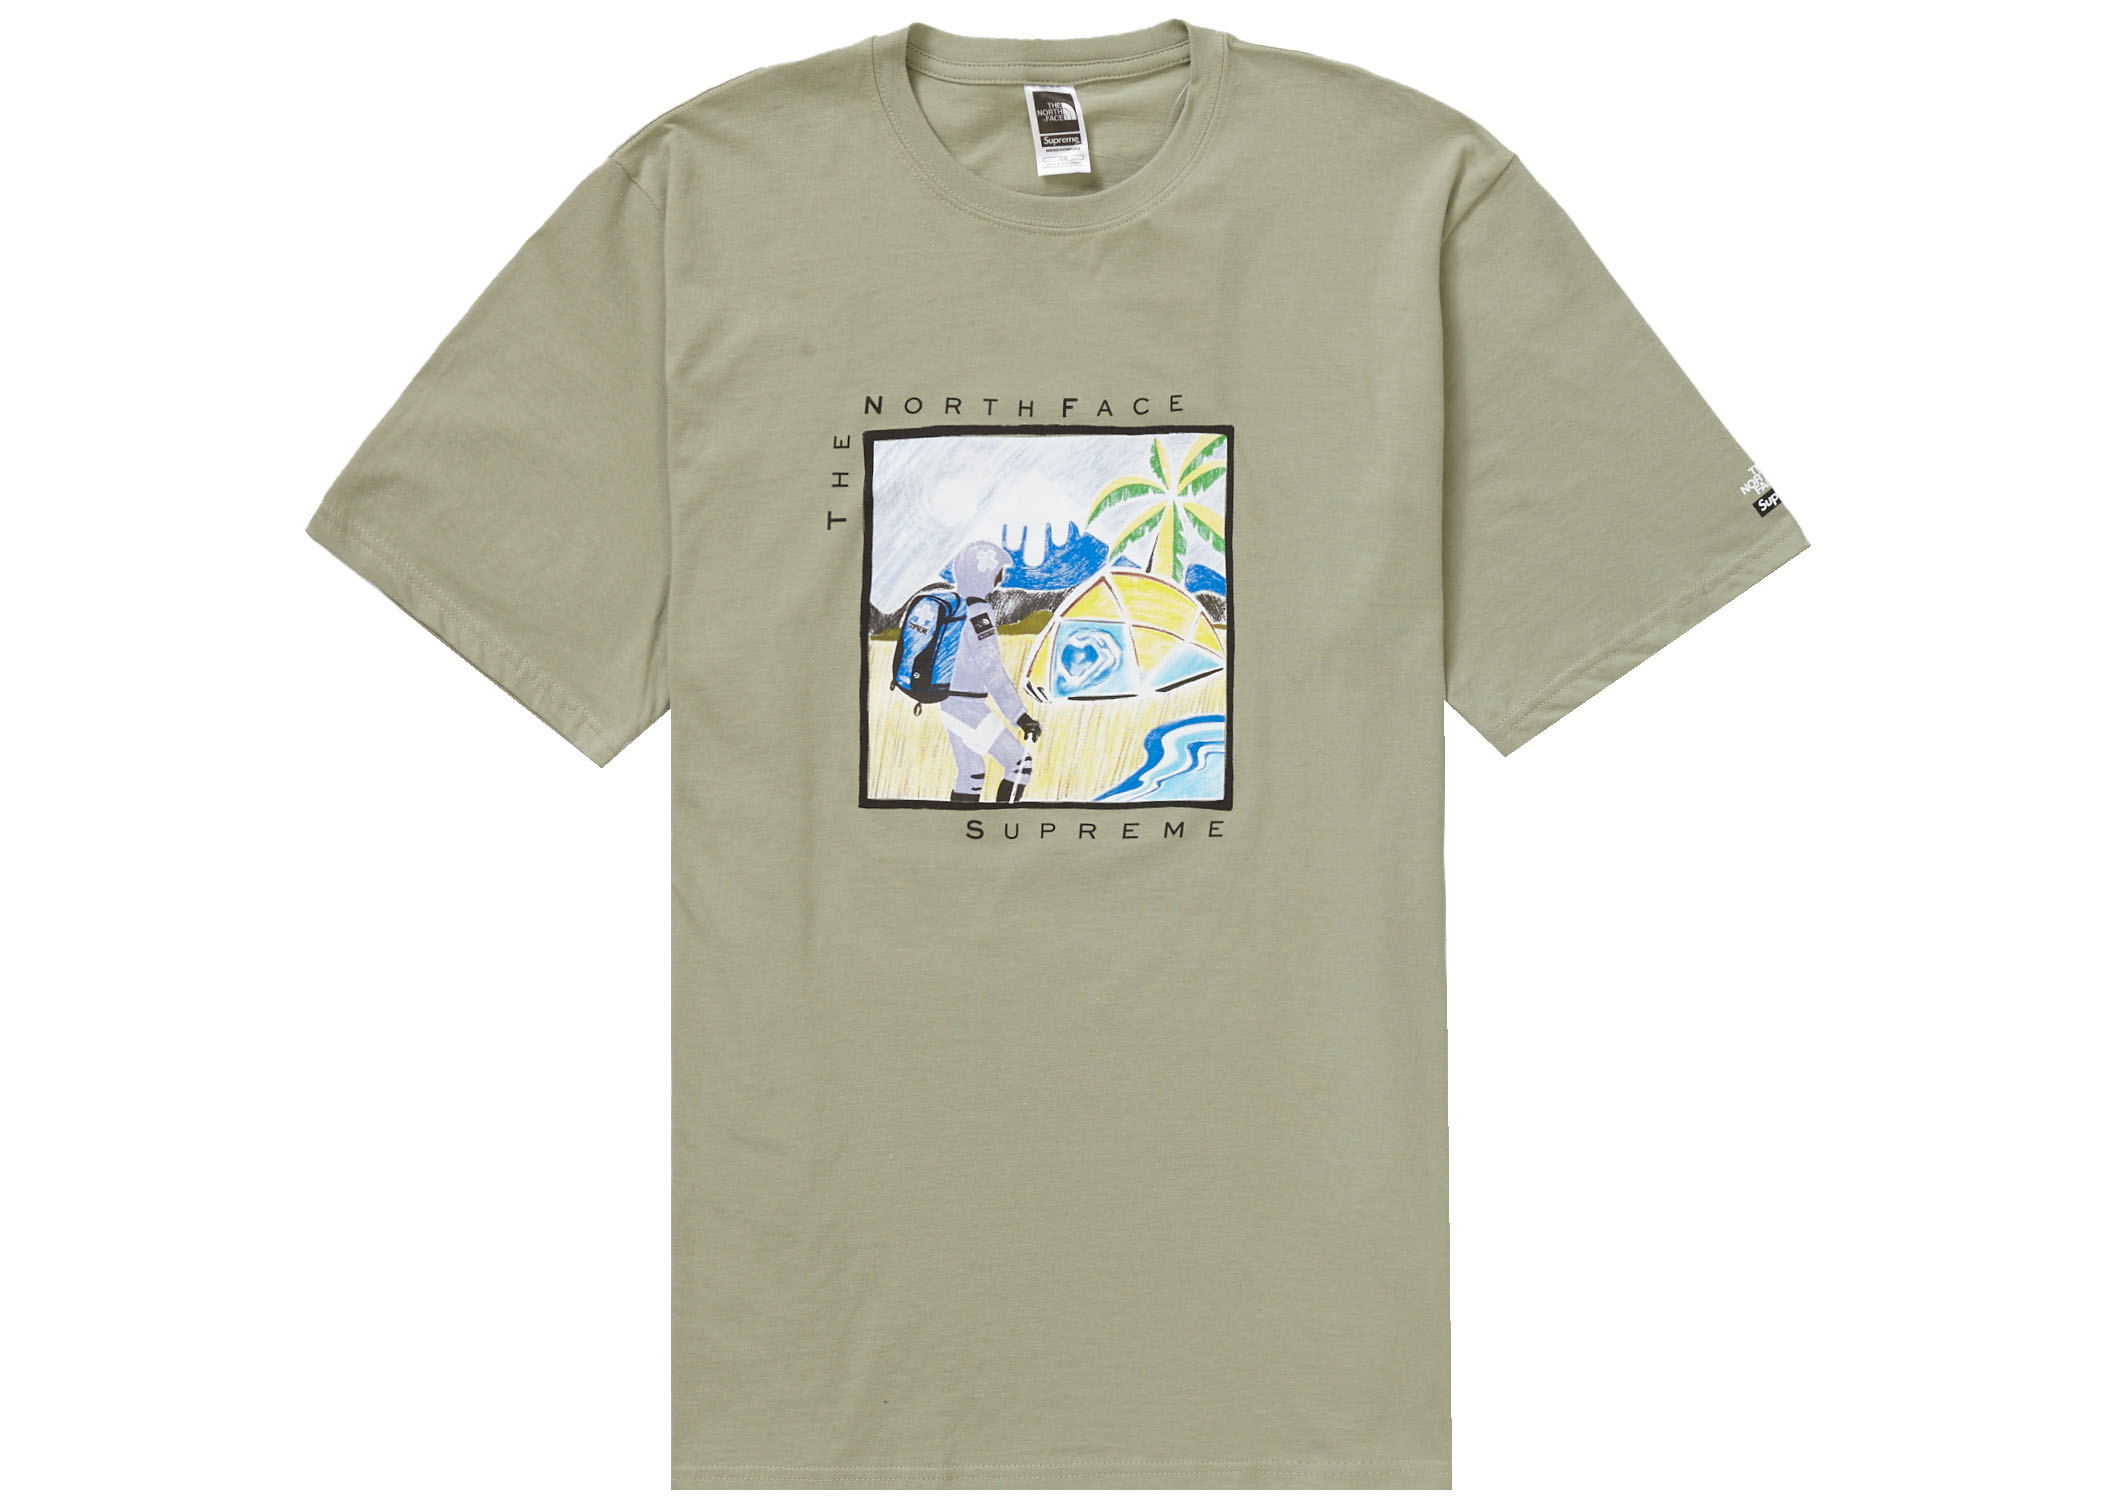 The North Face Sketch S/S Top